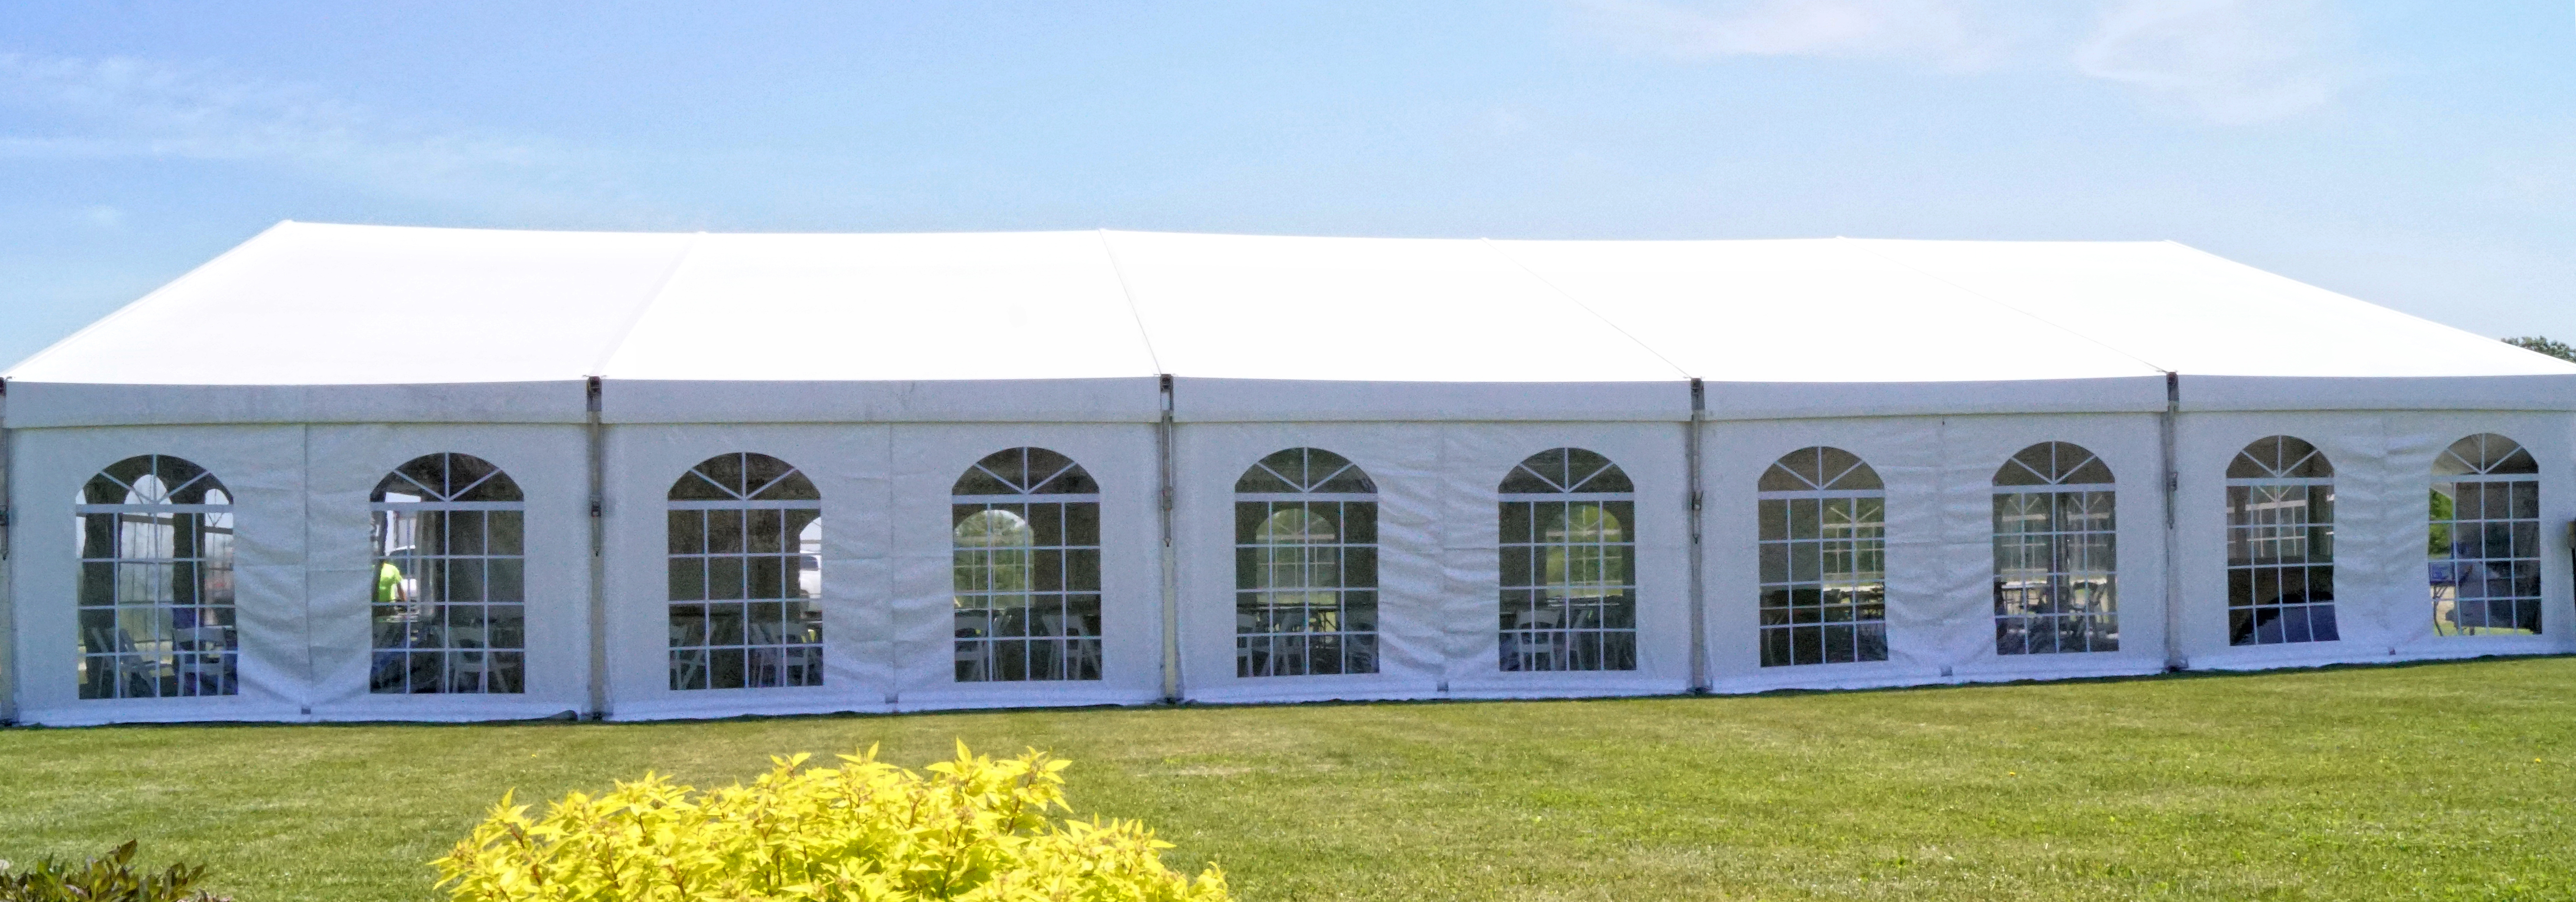 12 Meter Clearspan tent with window wall